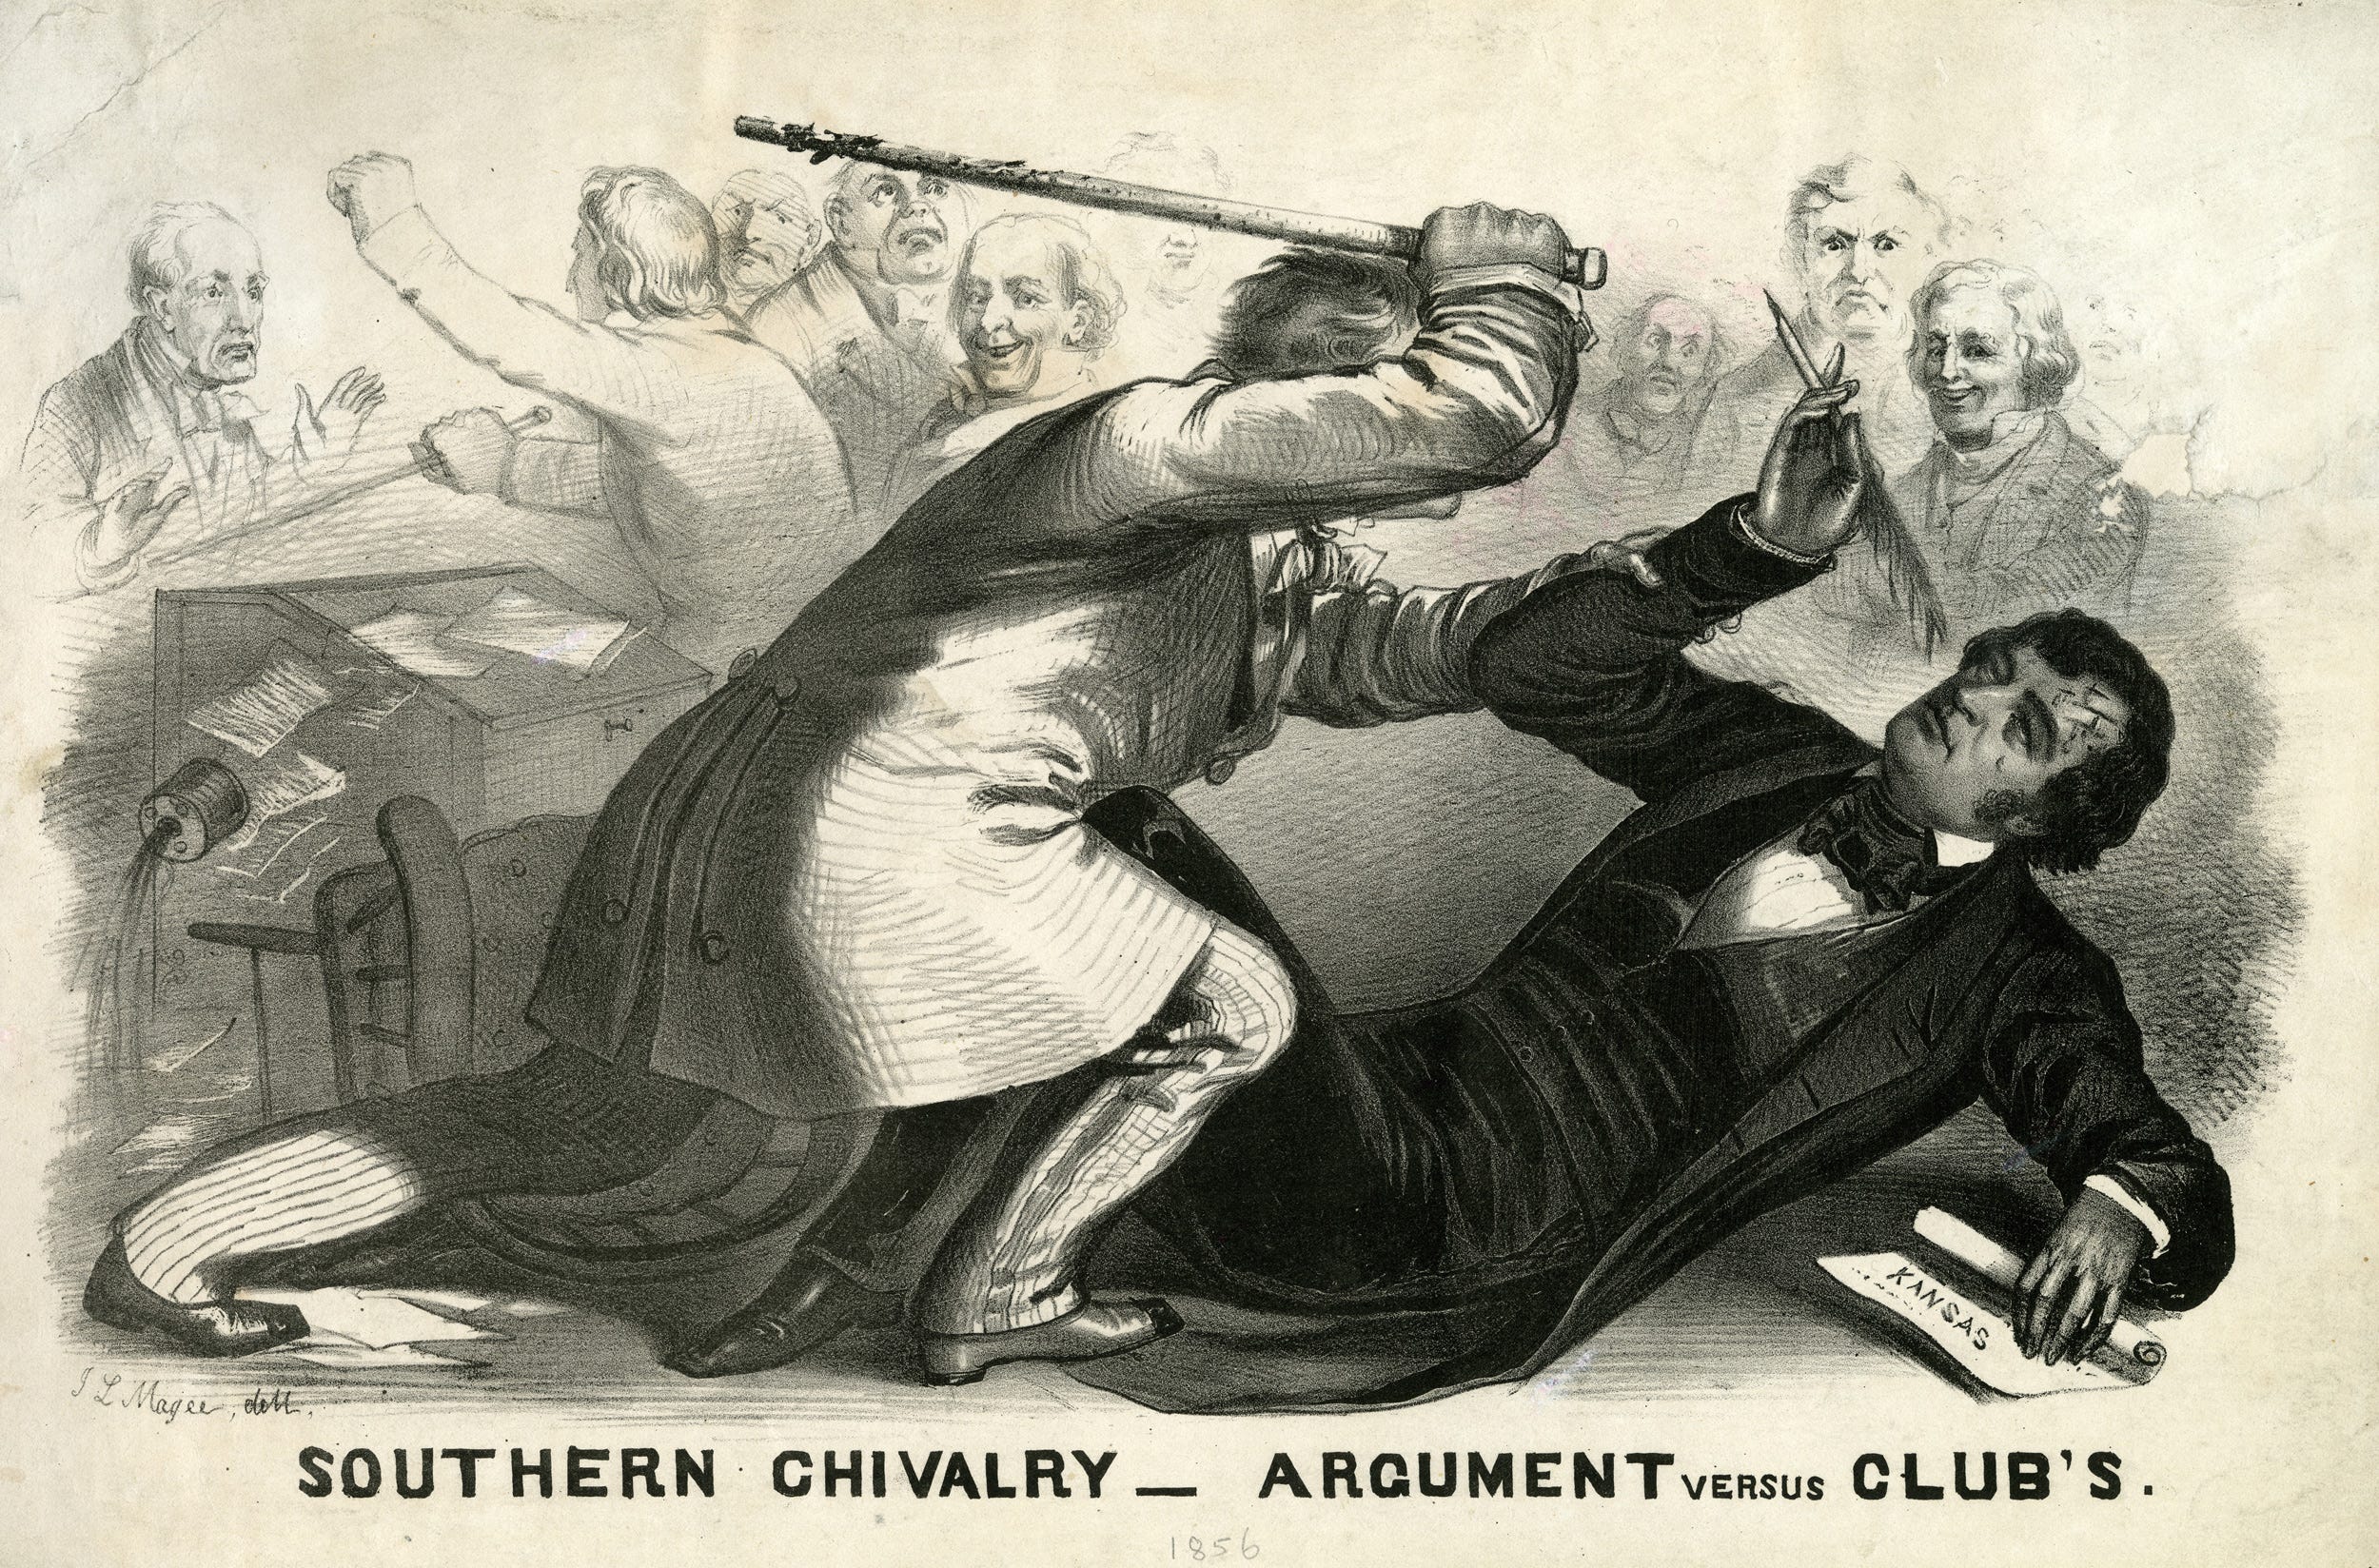 Man attacking other man (who's on the ground) with a heavy stick, while others, seemingly oblivious are in background